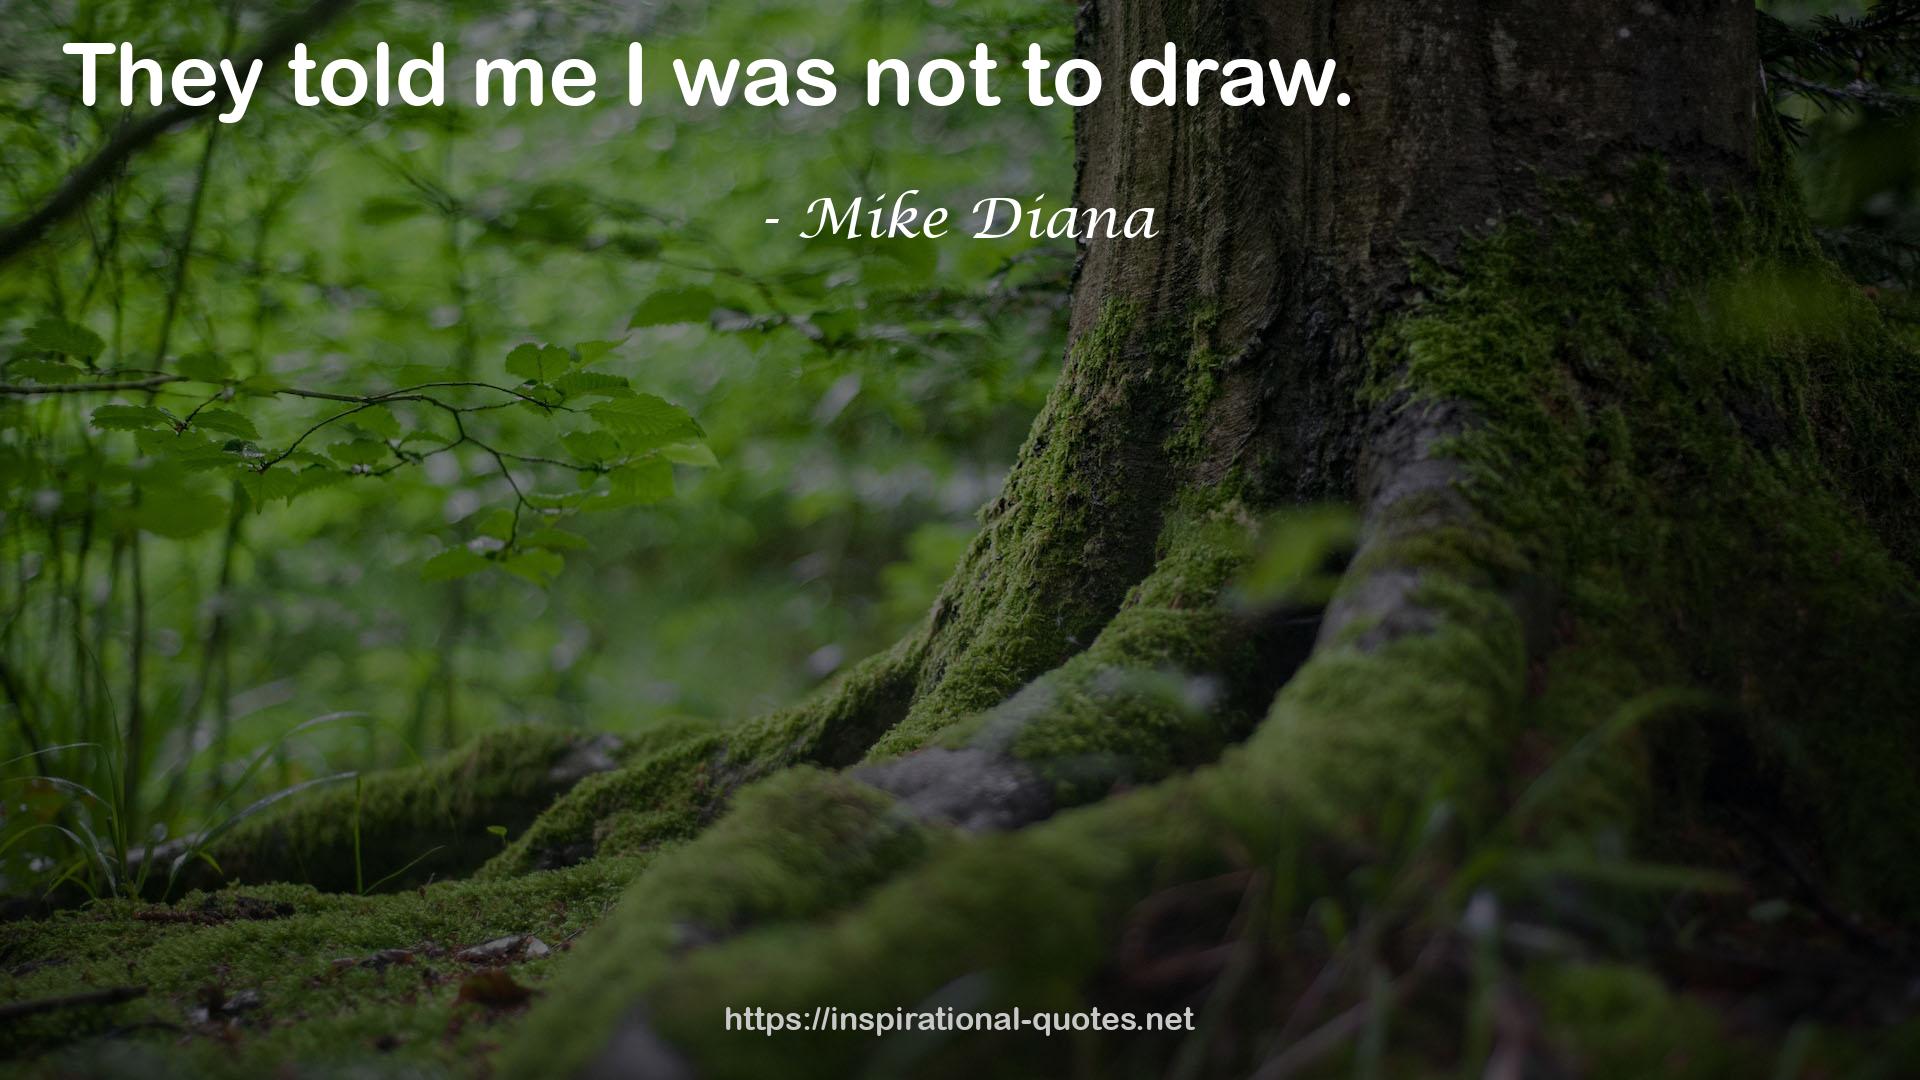 Mike Diana QUOTES